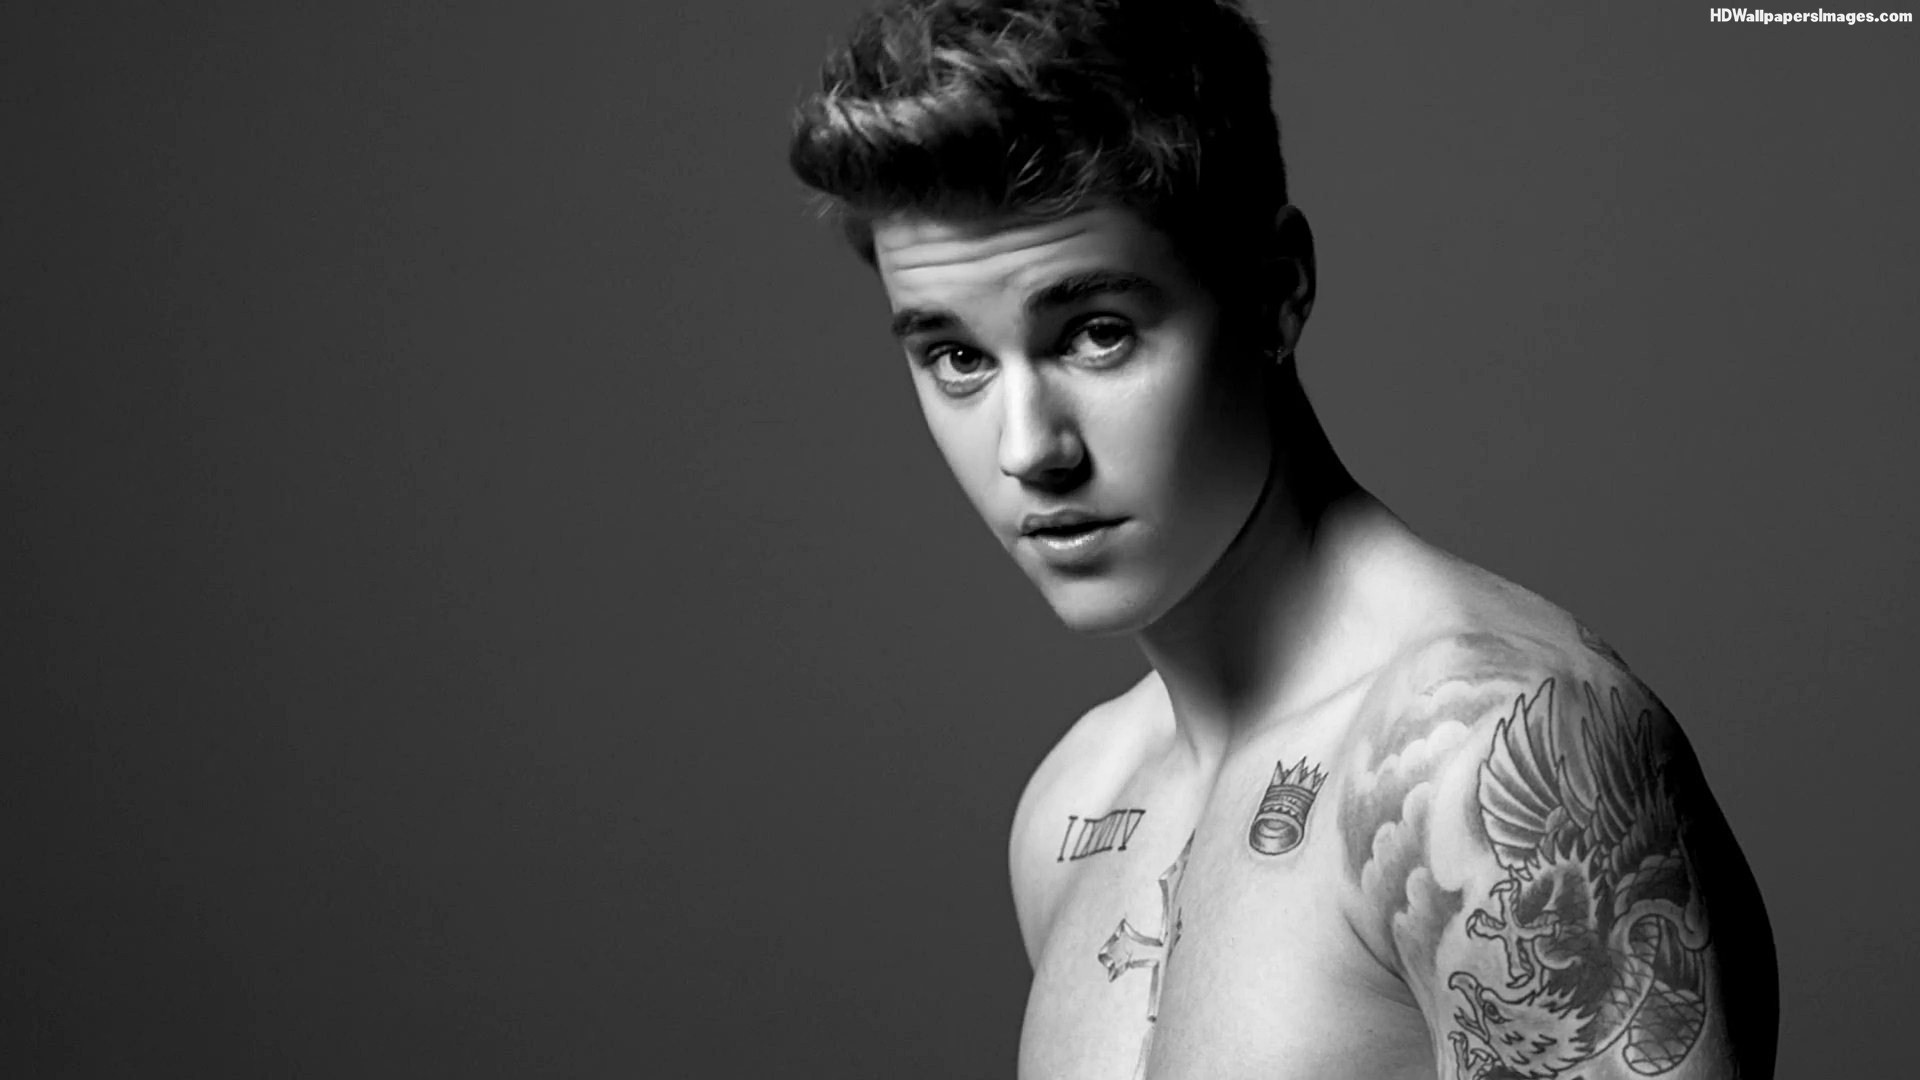 Justin Bieber Wallpapers High Resolution And Quality - Justin Bieber Wallpapers 2015 , HD Wallpaper & Backgrounds